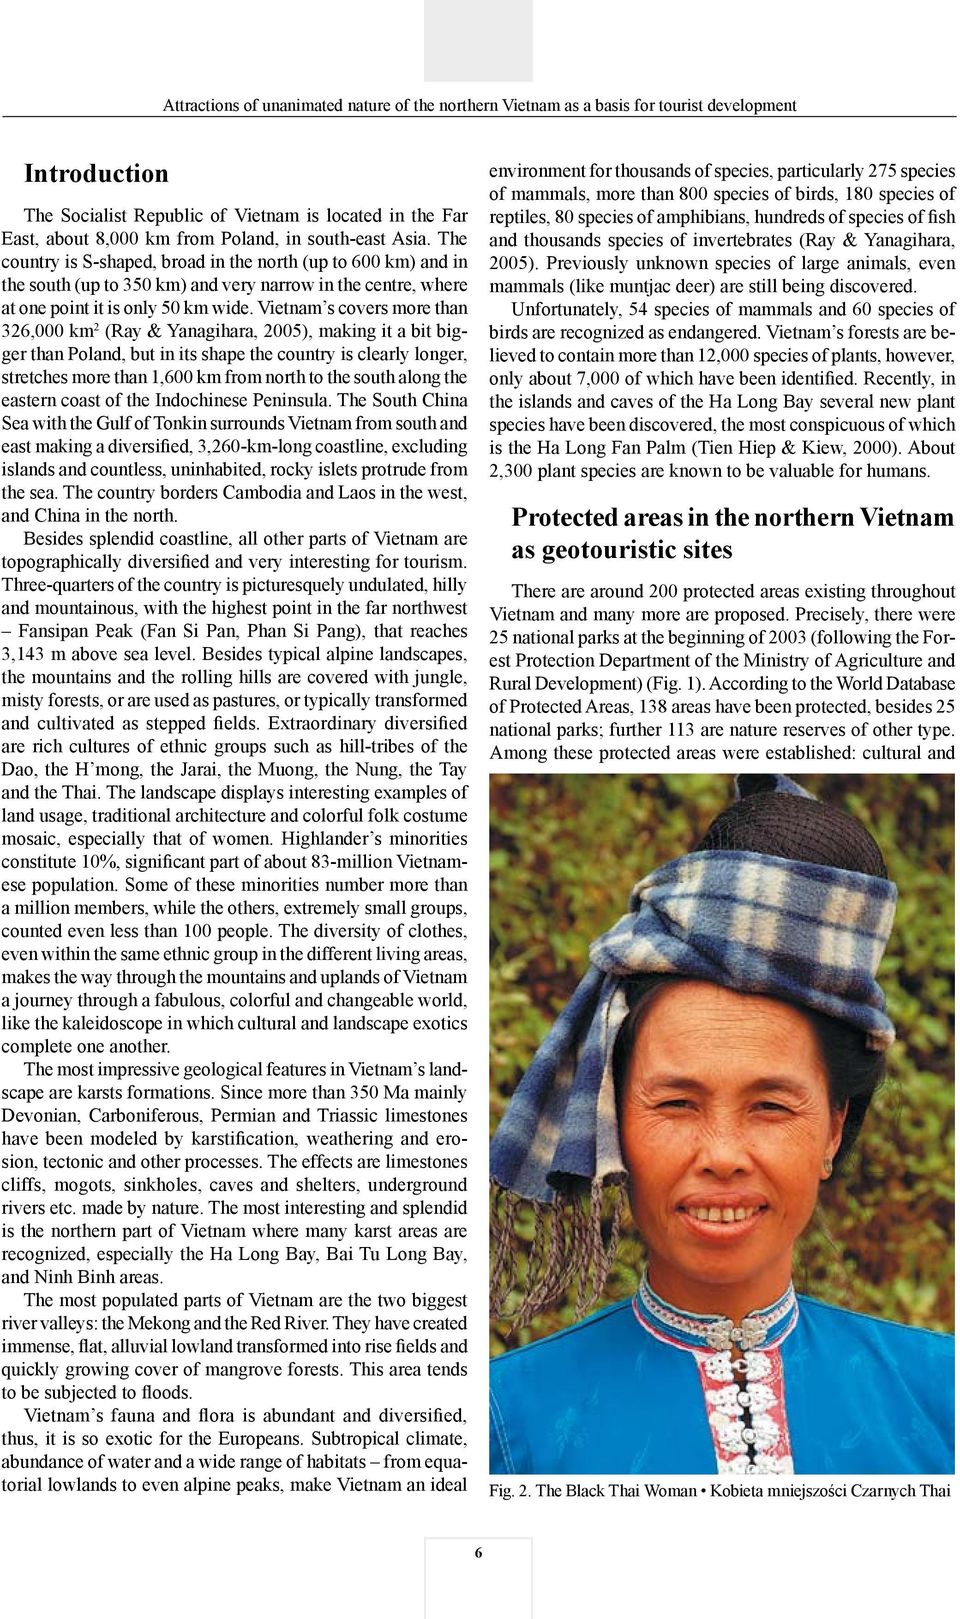 Vietnam s covers more than 326,000 km 2 (Ray & Yanagihara, 2005), making it a bit bigger than Poland, but in its shape the country is clearly longer, stretches more than 1,600 km from north to the